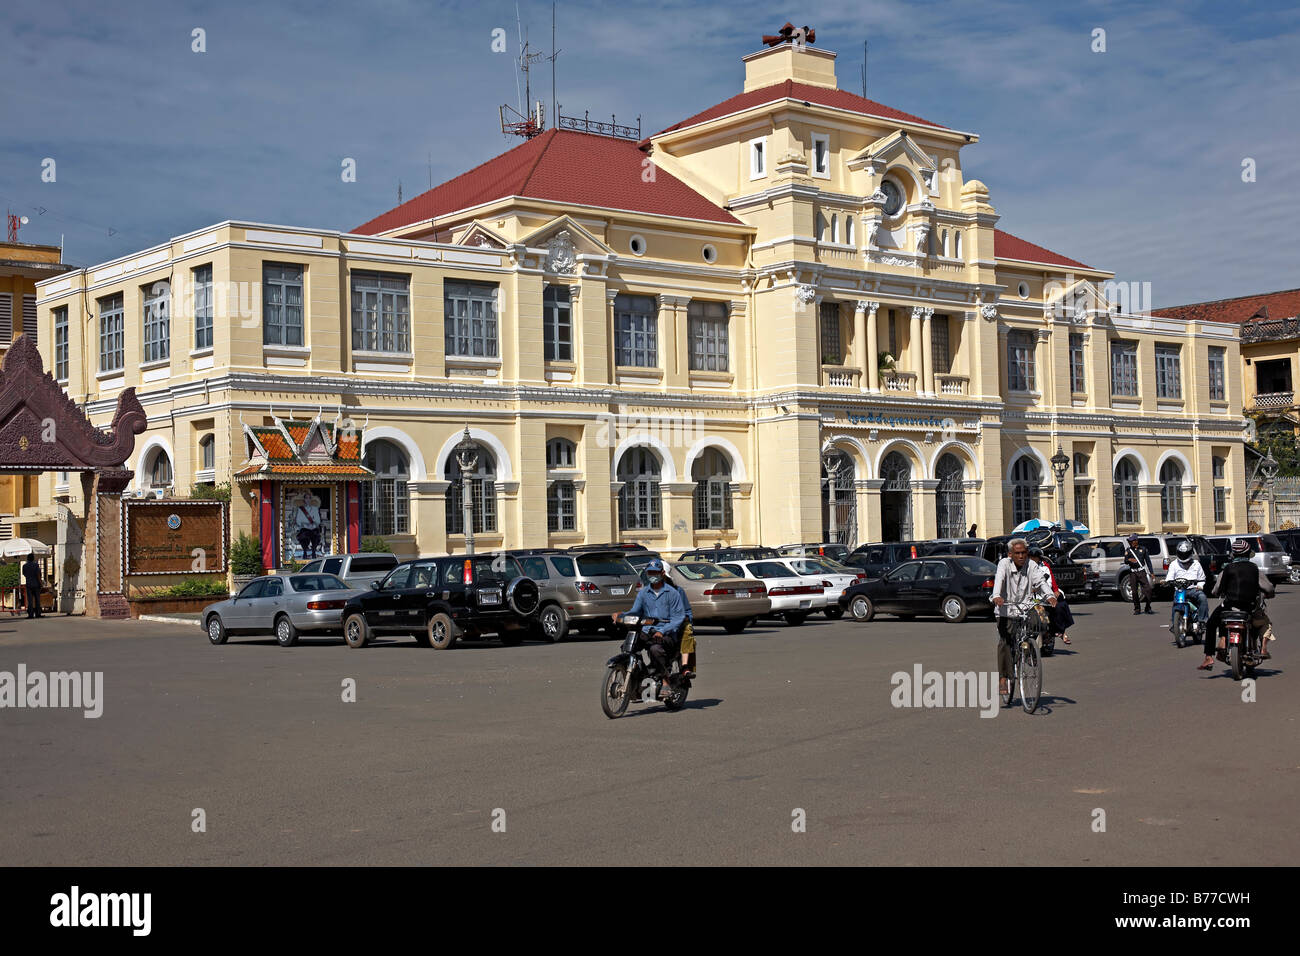 Post Office Phnom Penh Cambodia, historic building symbolising the French colonial era with its splendid and grand facade. S. E. Asia Stock Photo